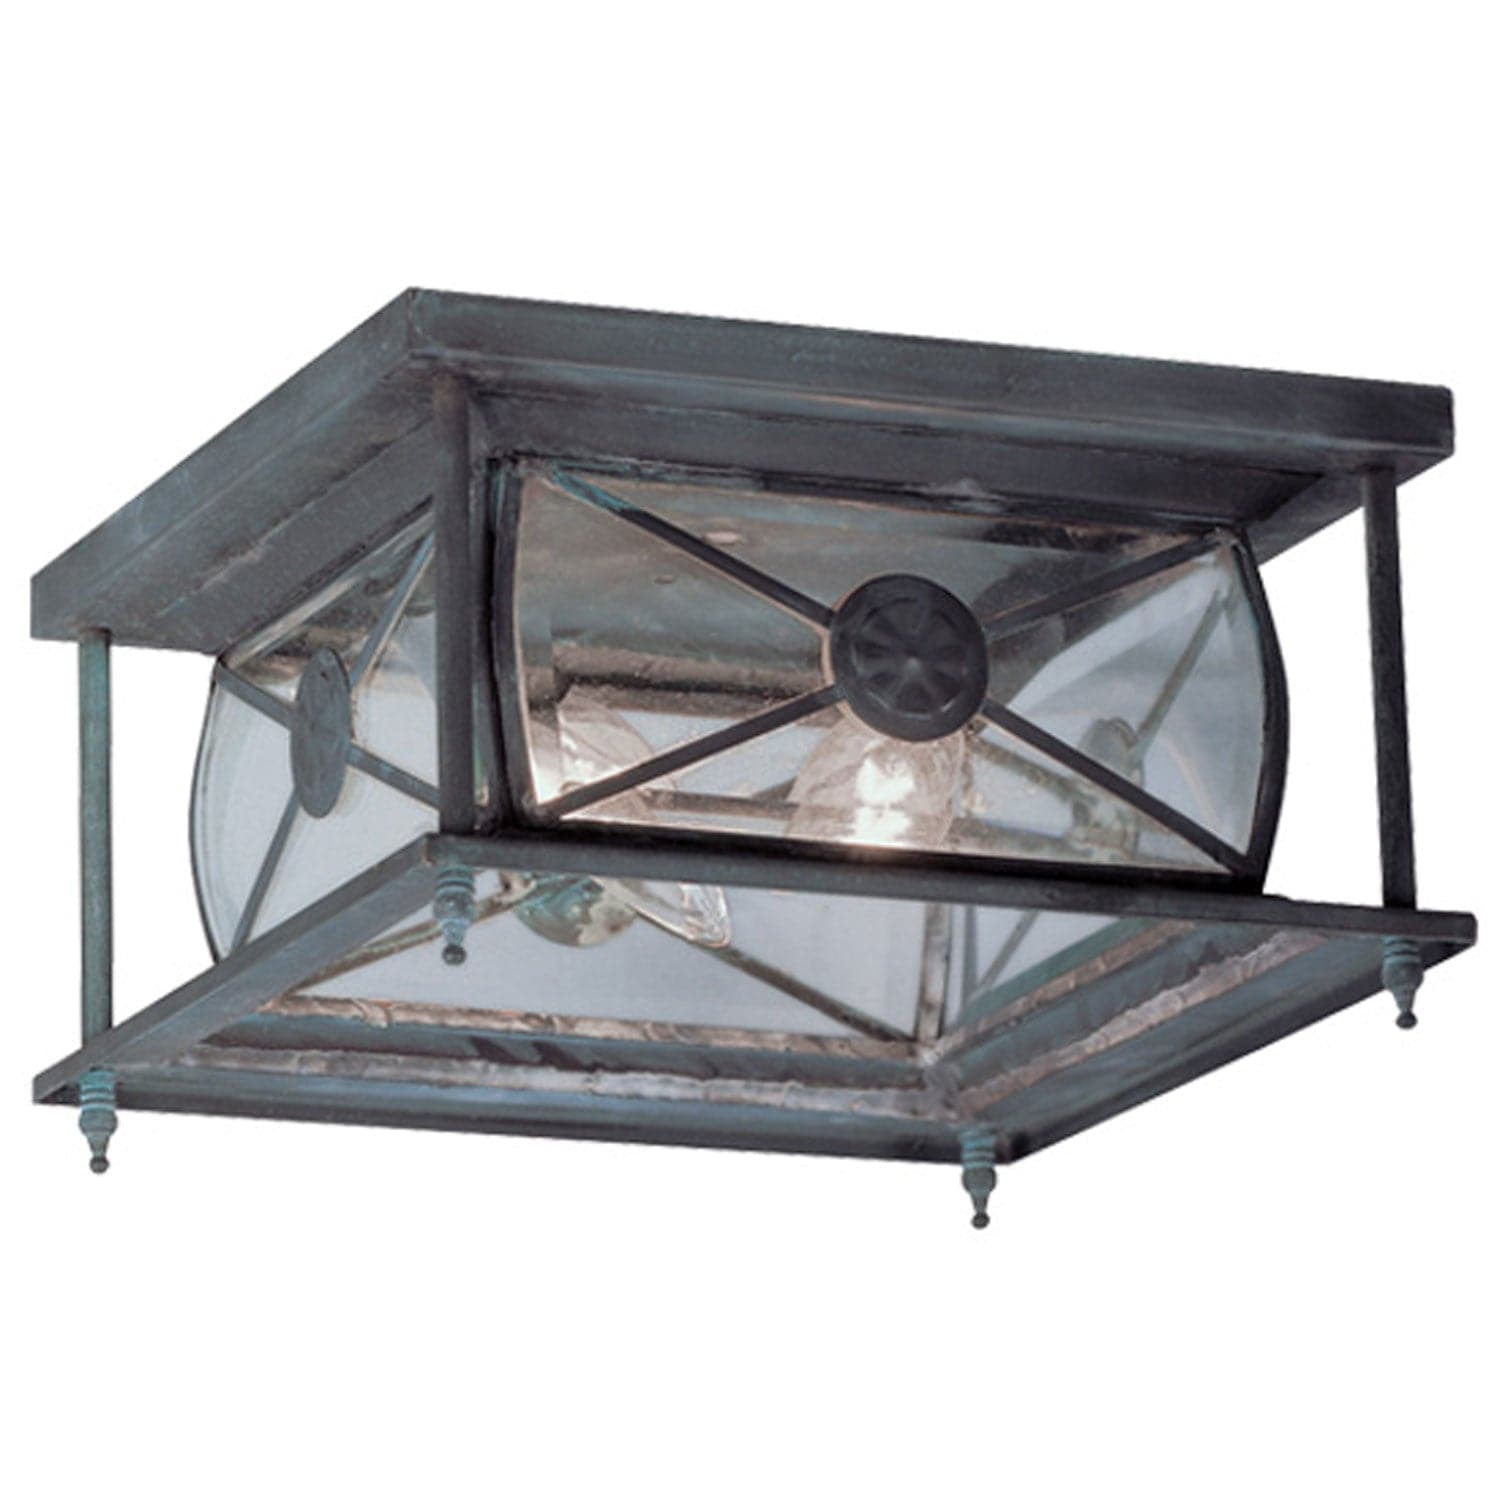 Livex Lighting - 2090-61 - Two Light Outdoor Ceiling Mount - Providence - Charcoal